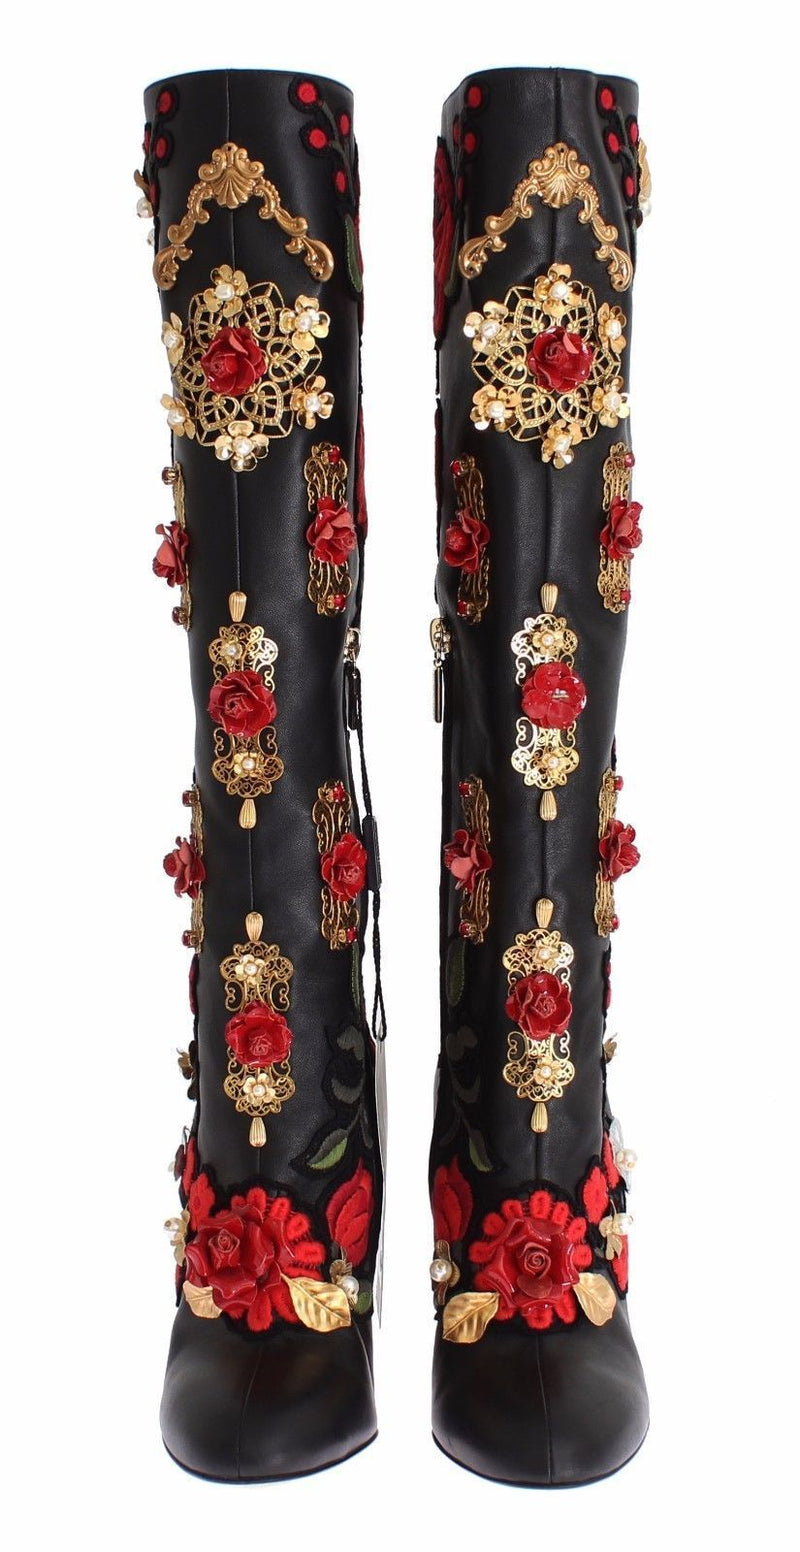 Dolce & Gabbana Red Roses Crystal Gold Heart Black Leather Boots